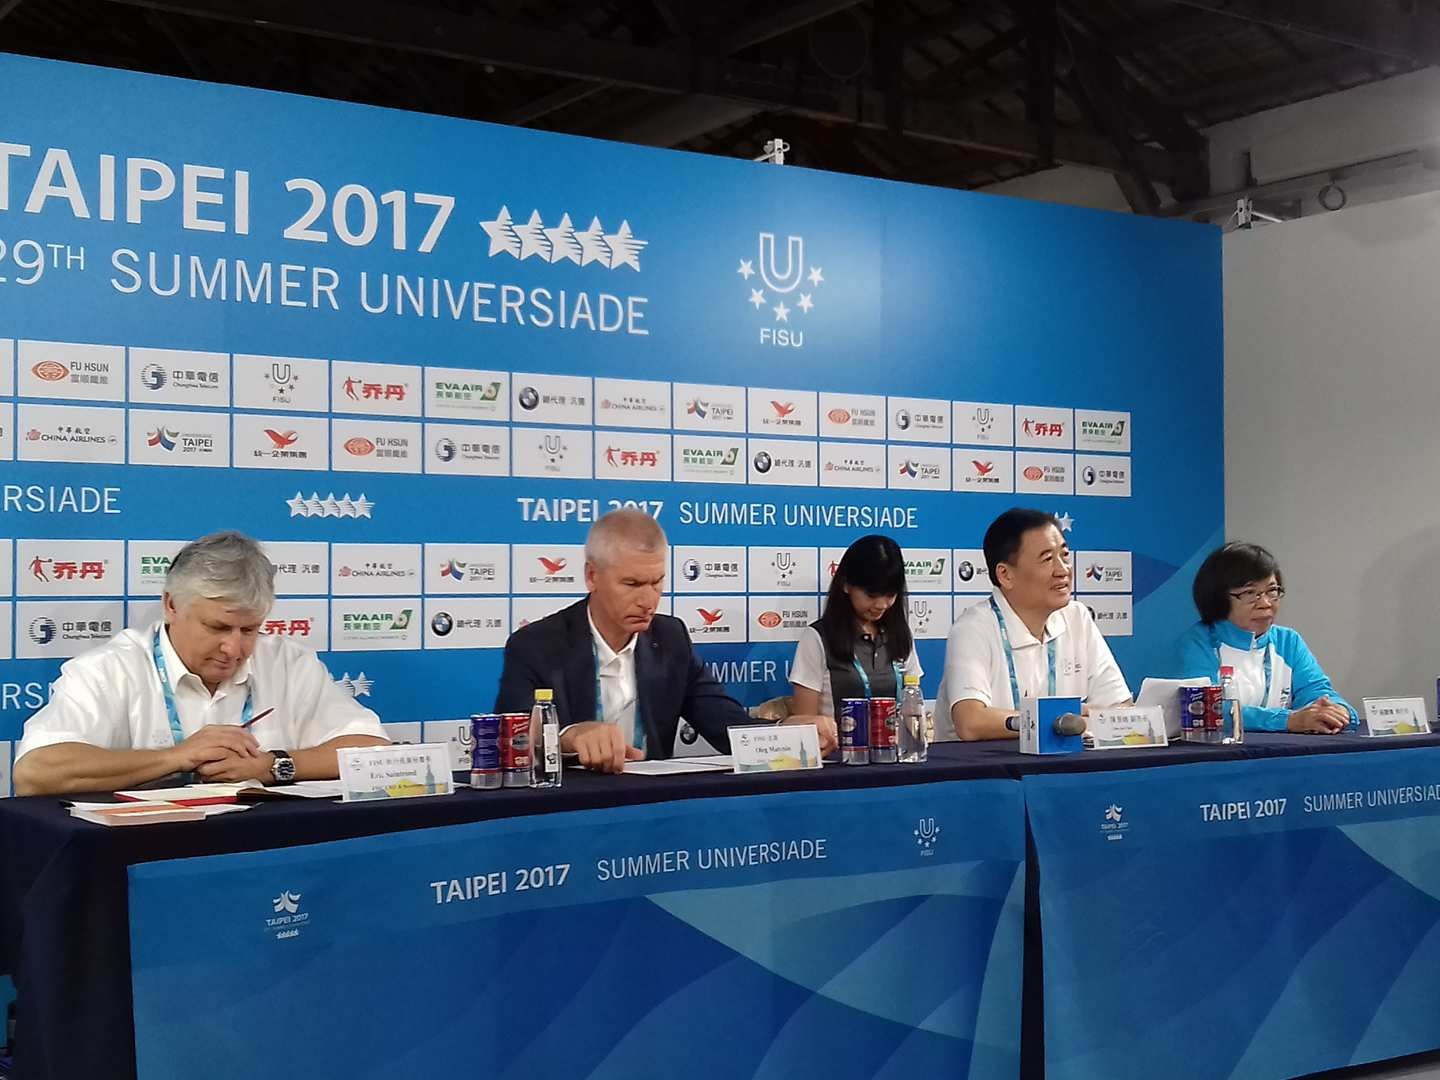 FISU President claims "everything in place" for successful Taipei 2017 Summer Universiade